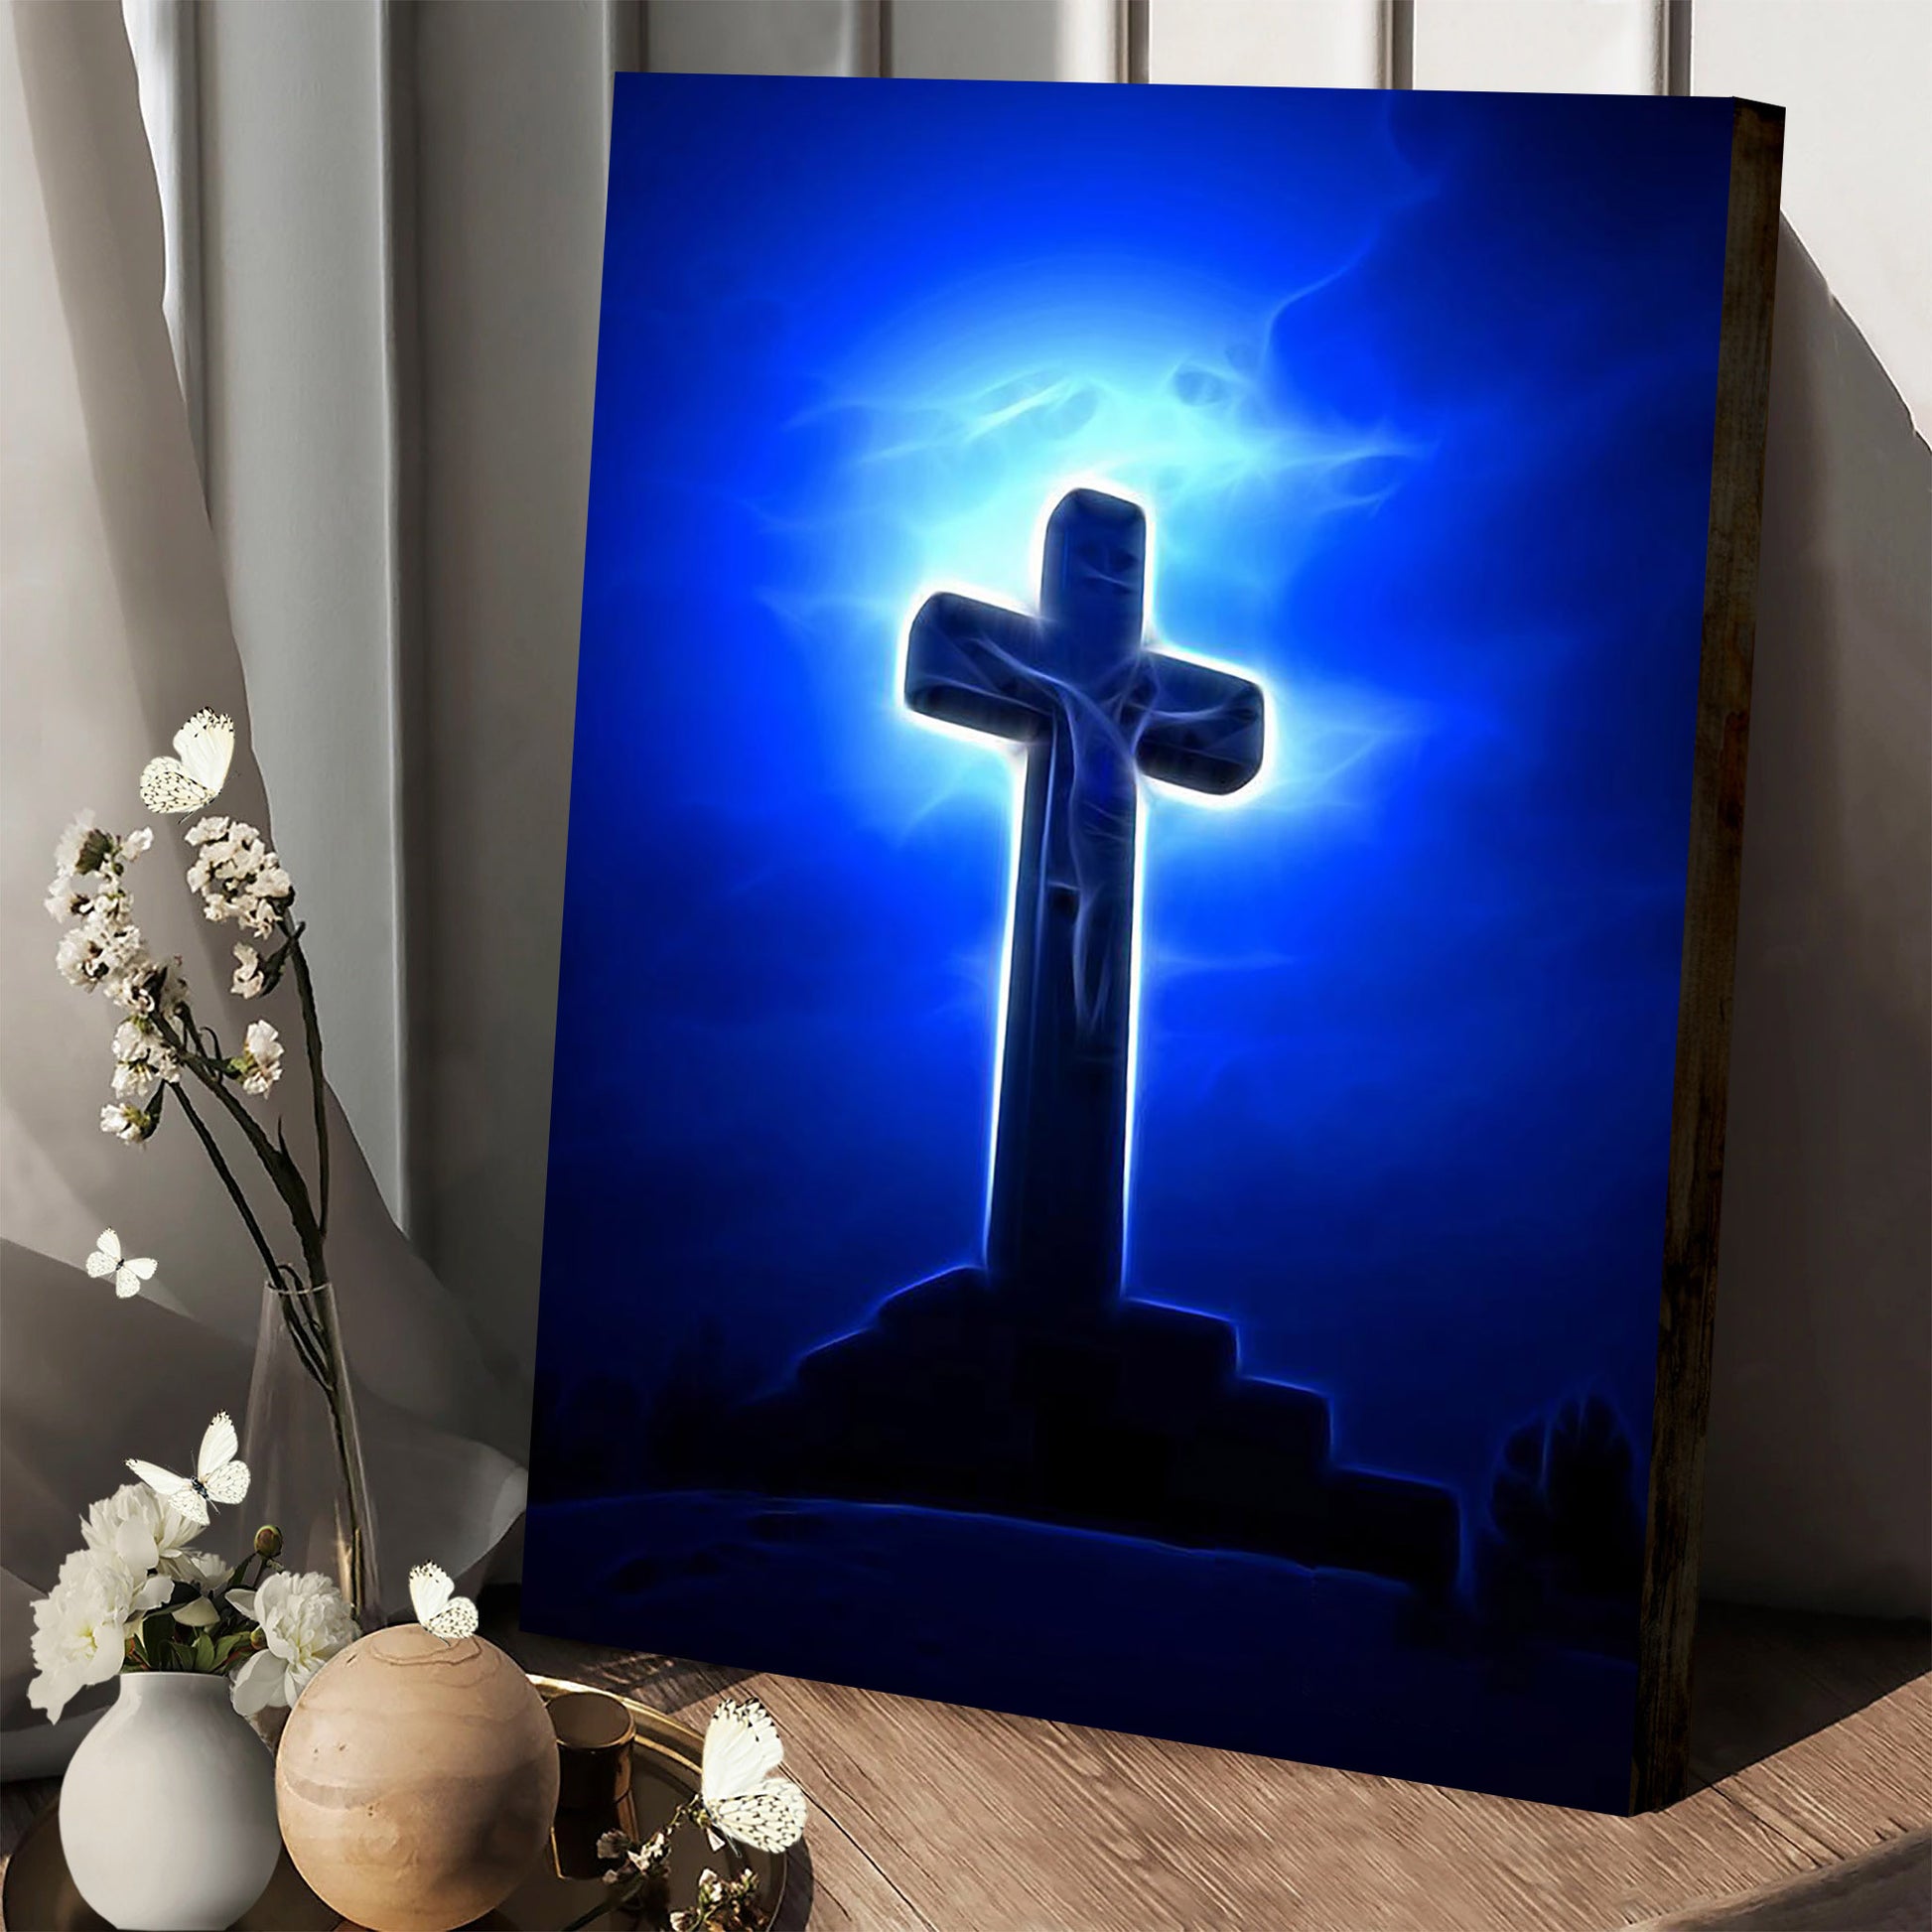 Dramatic Jesus Crucifixion Canvas Wall Art - Easter Canvas Pictures - Christian Canvas Wall Decor